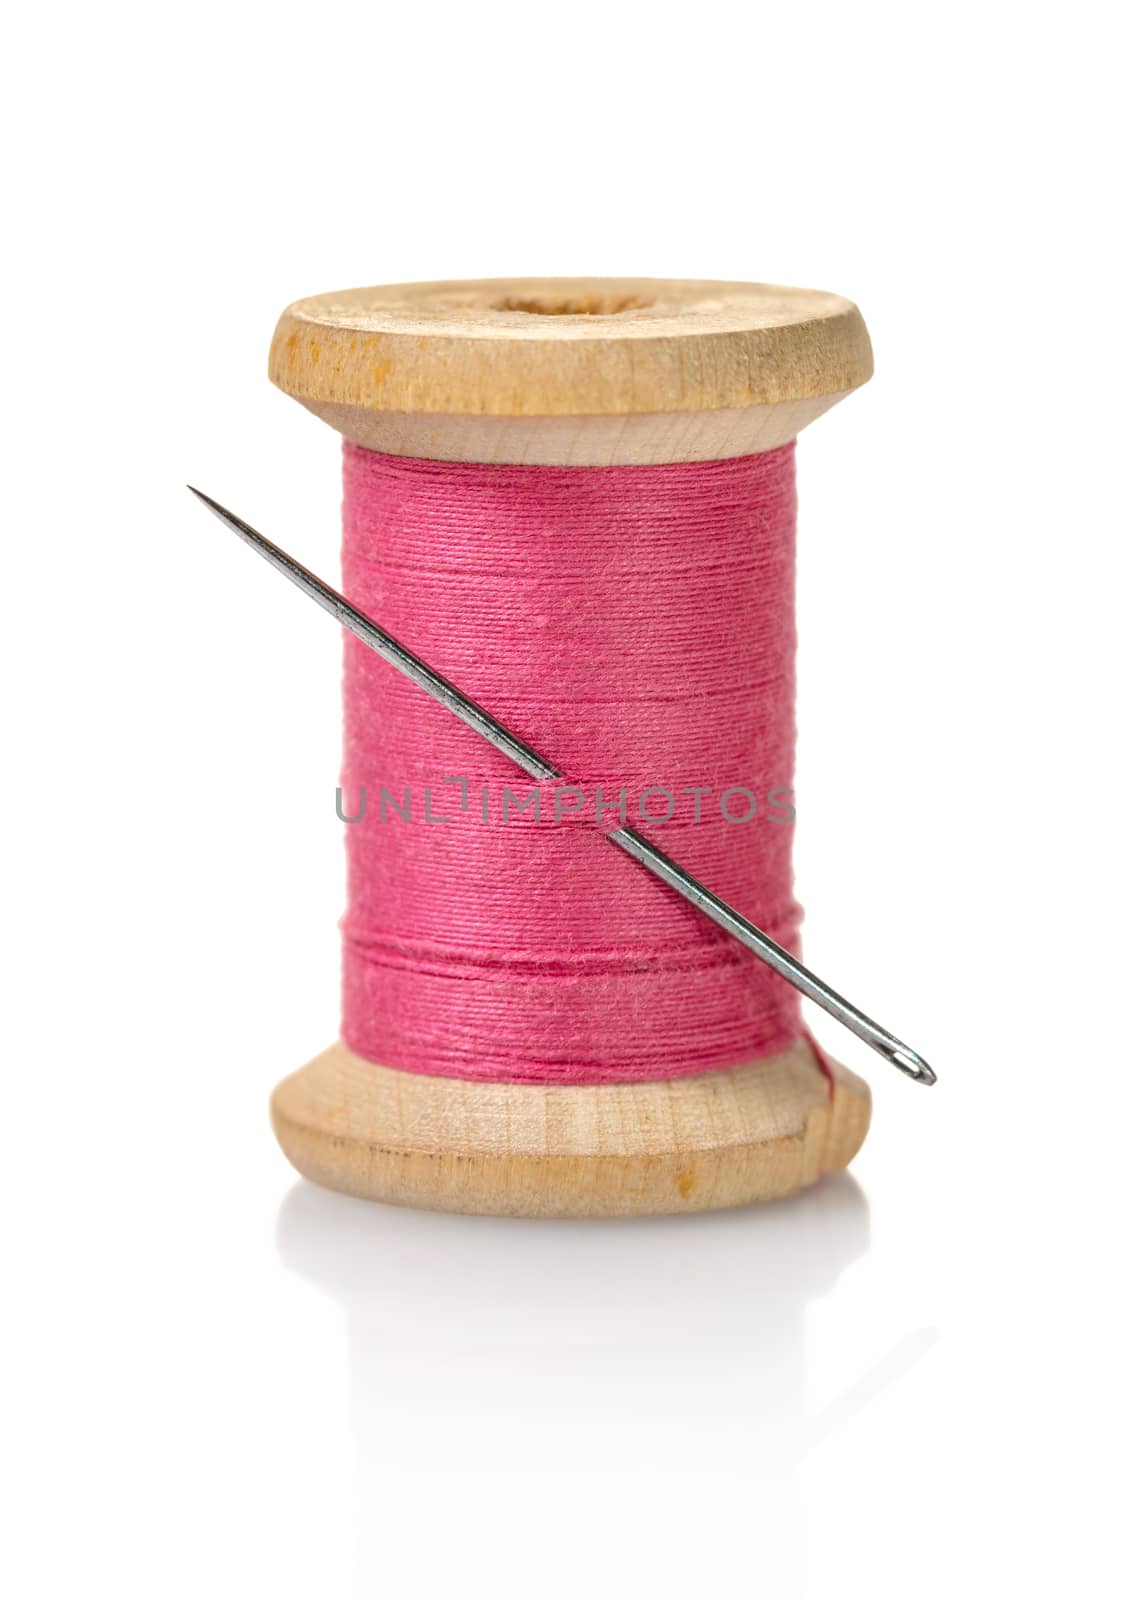 spool of pink threads  by MegaArt